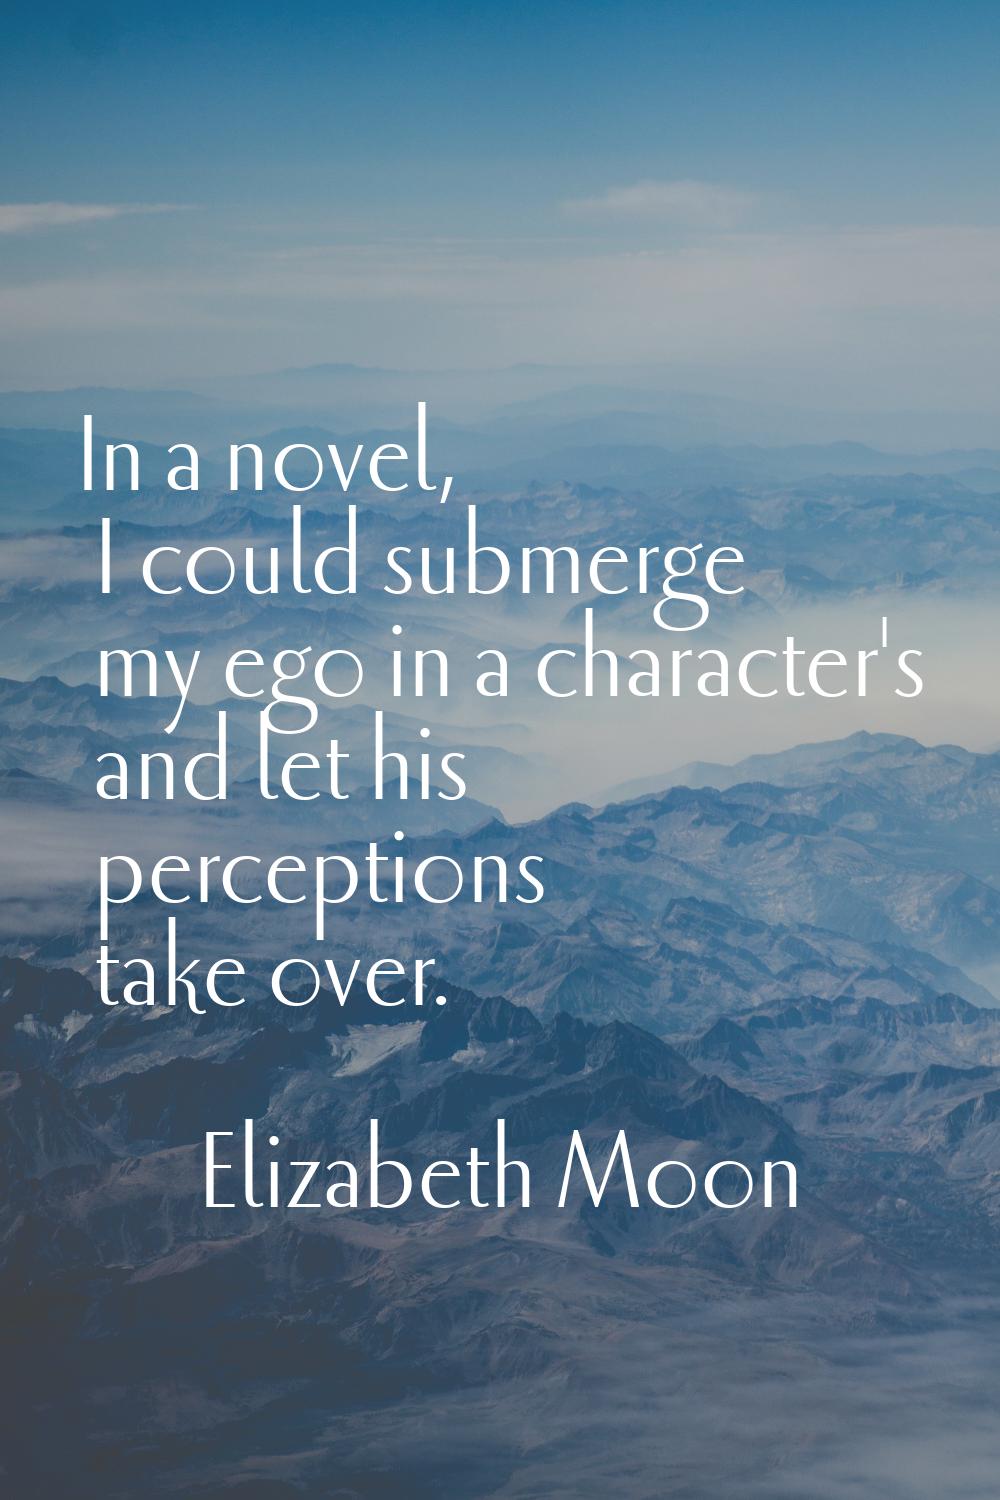 In a novel, I could submerge my ego in a character's and let his perceptions take over.